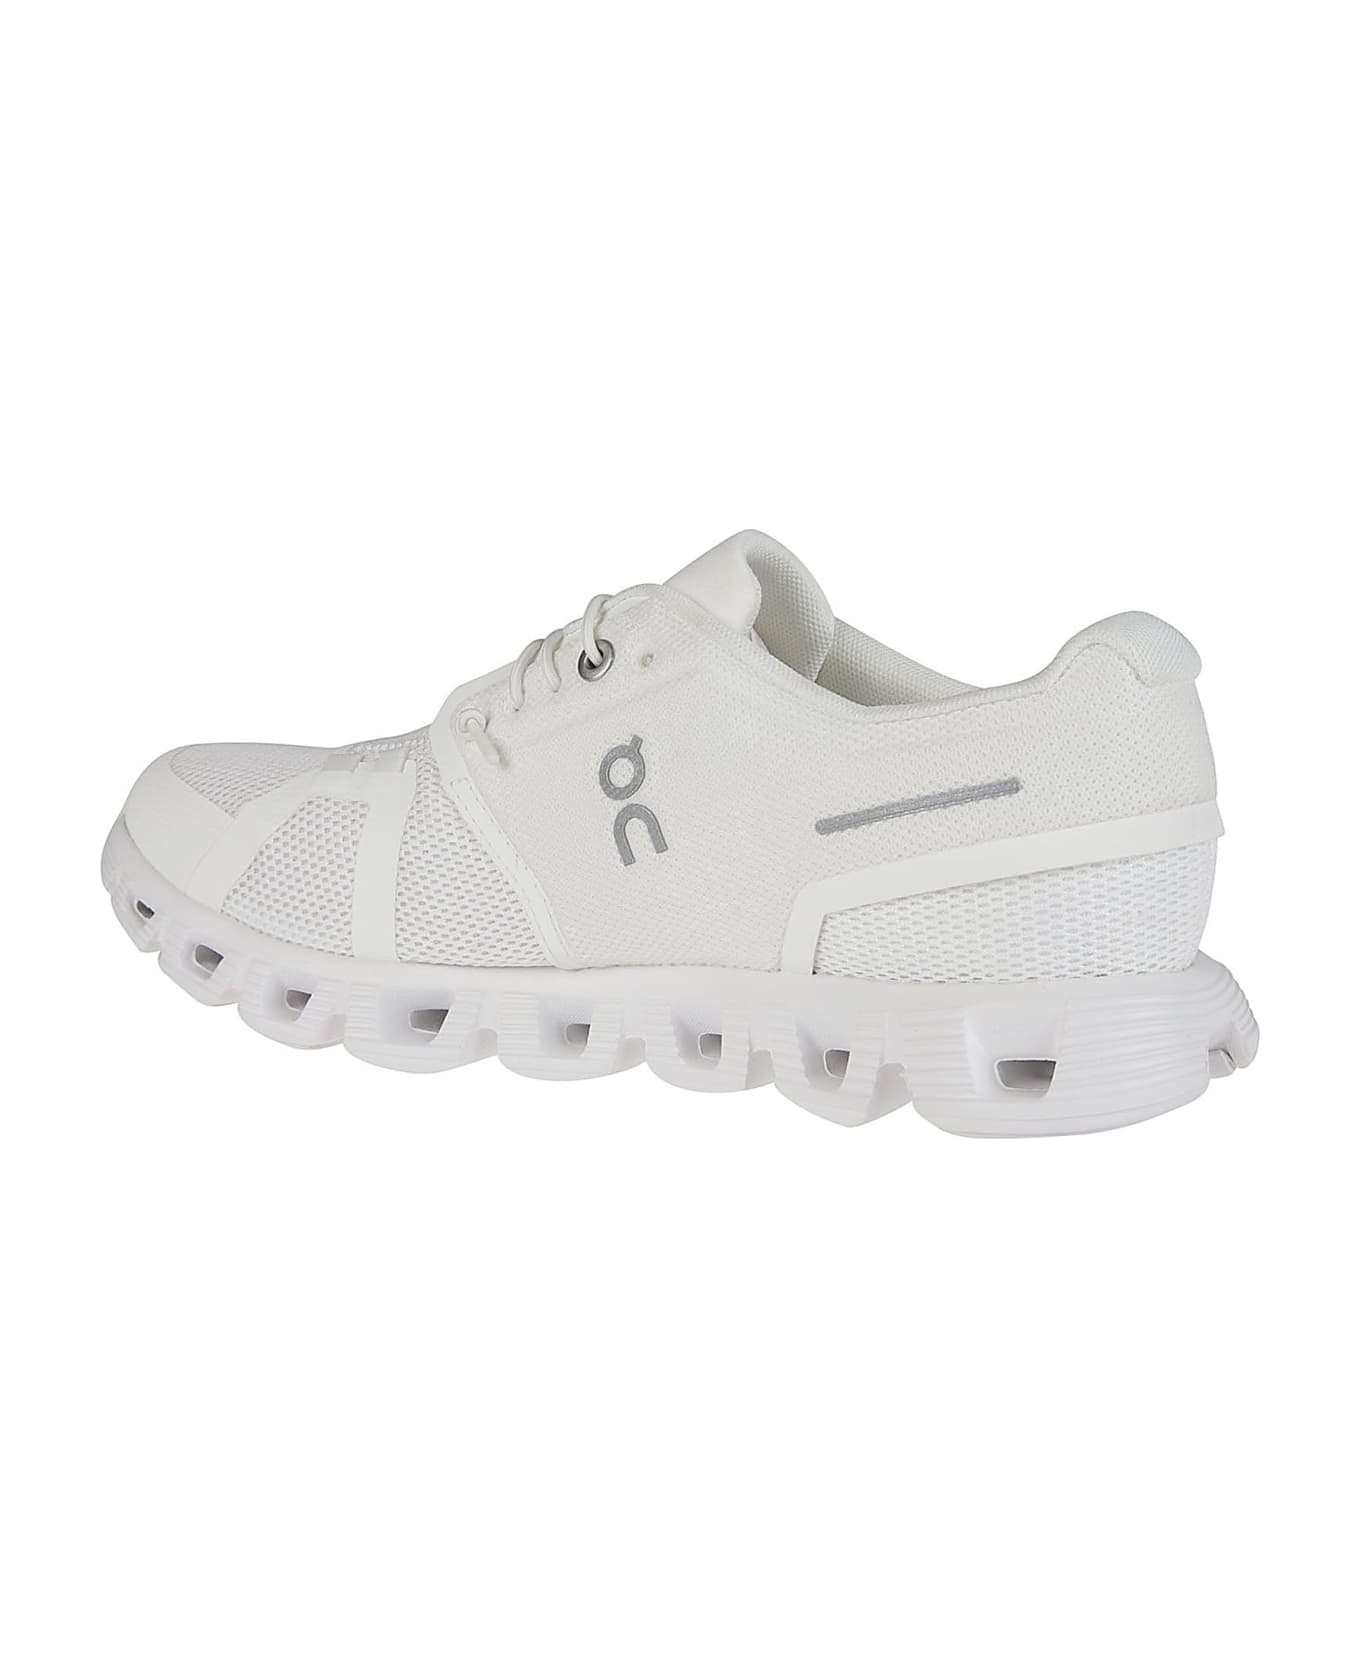 ON Cloud 5 Sneakers - Undyed/white/white スニーカー